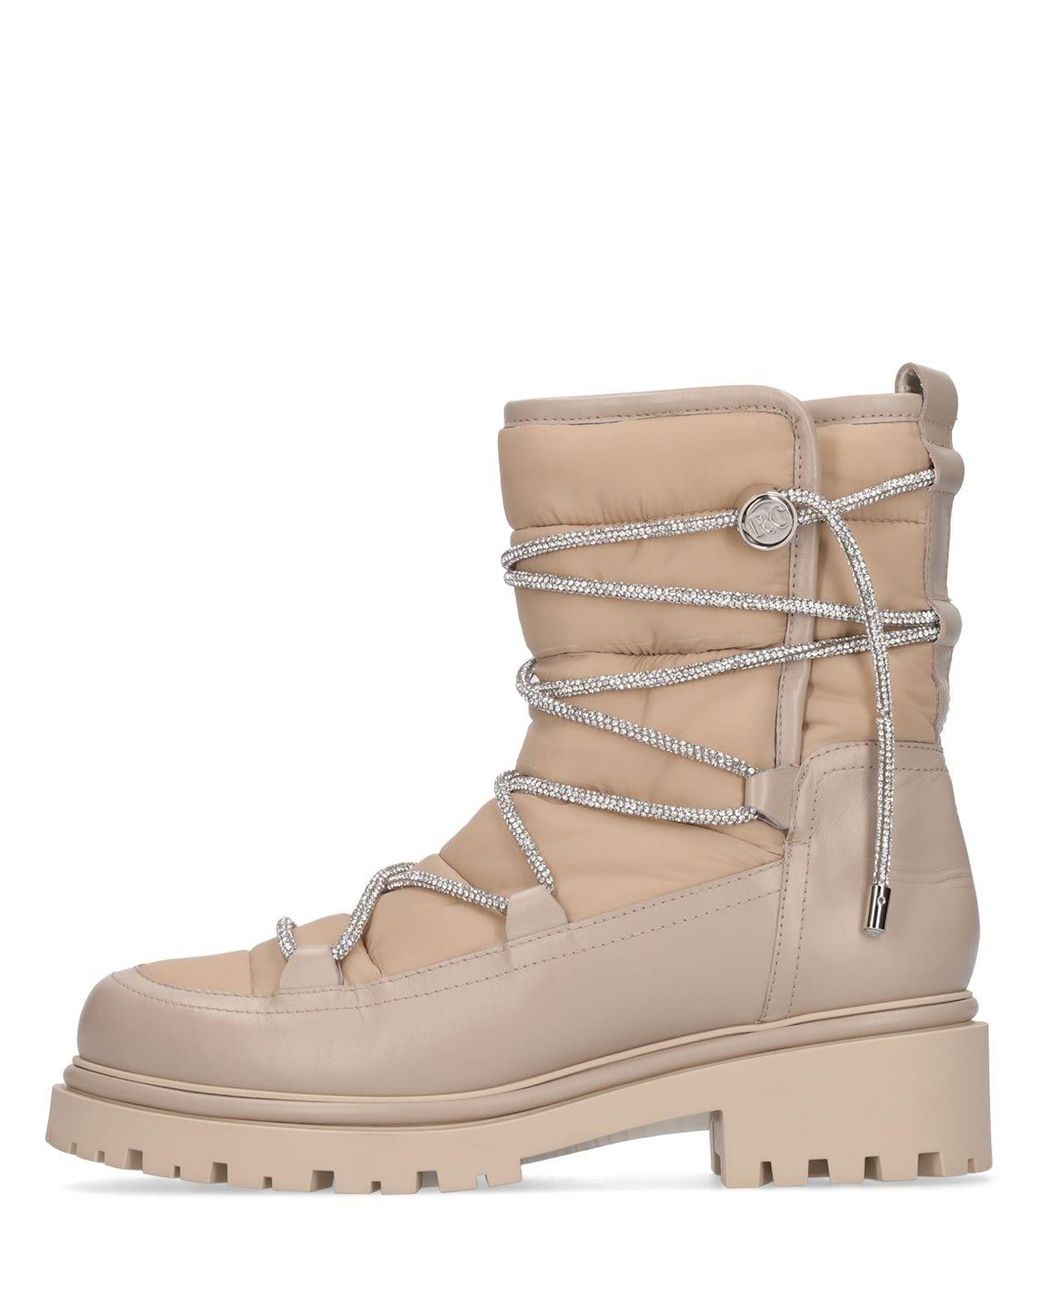 Rene Caovilla 25mm Leather Snow Boots in Beige (Natural) | Lyst